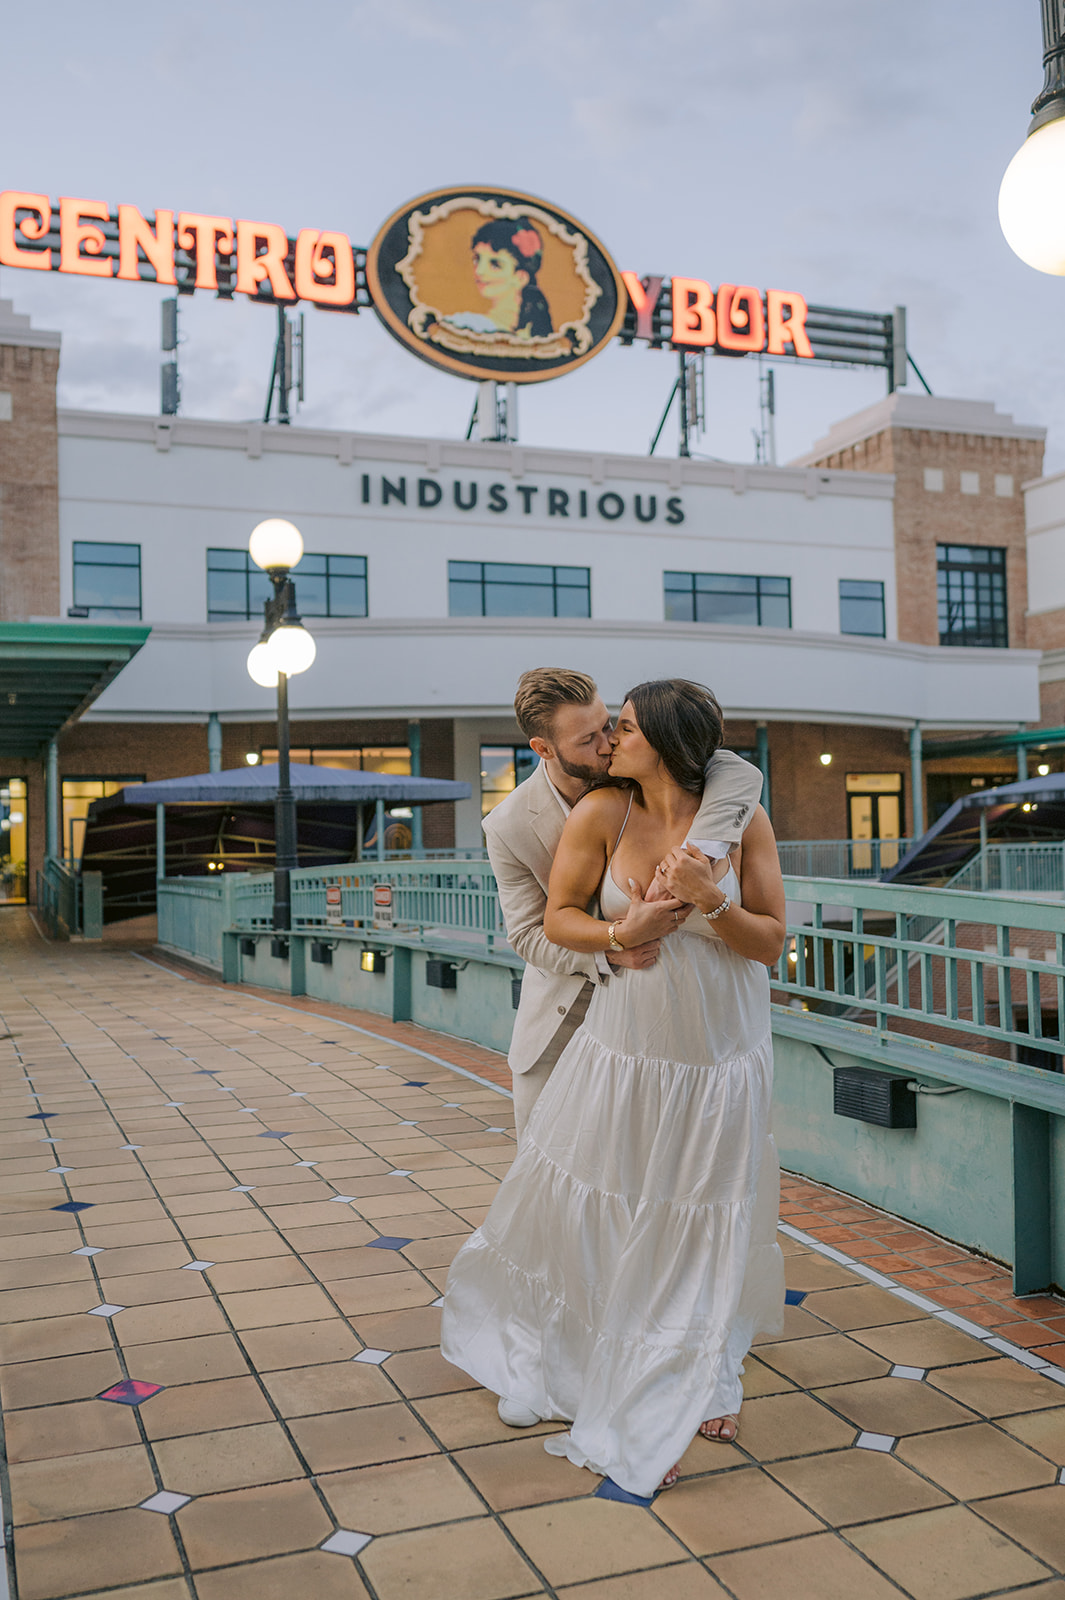 "Hailey and Jeff lost in a world of their own in the bustling Ybor City"
